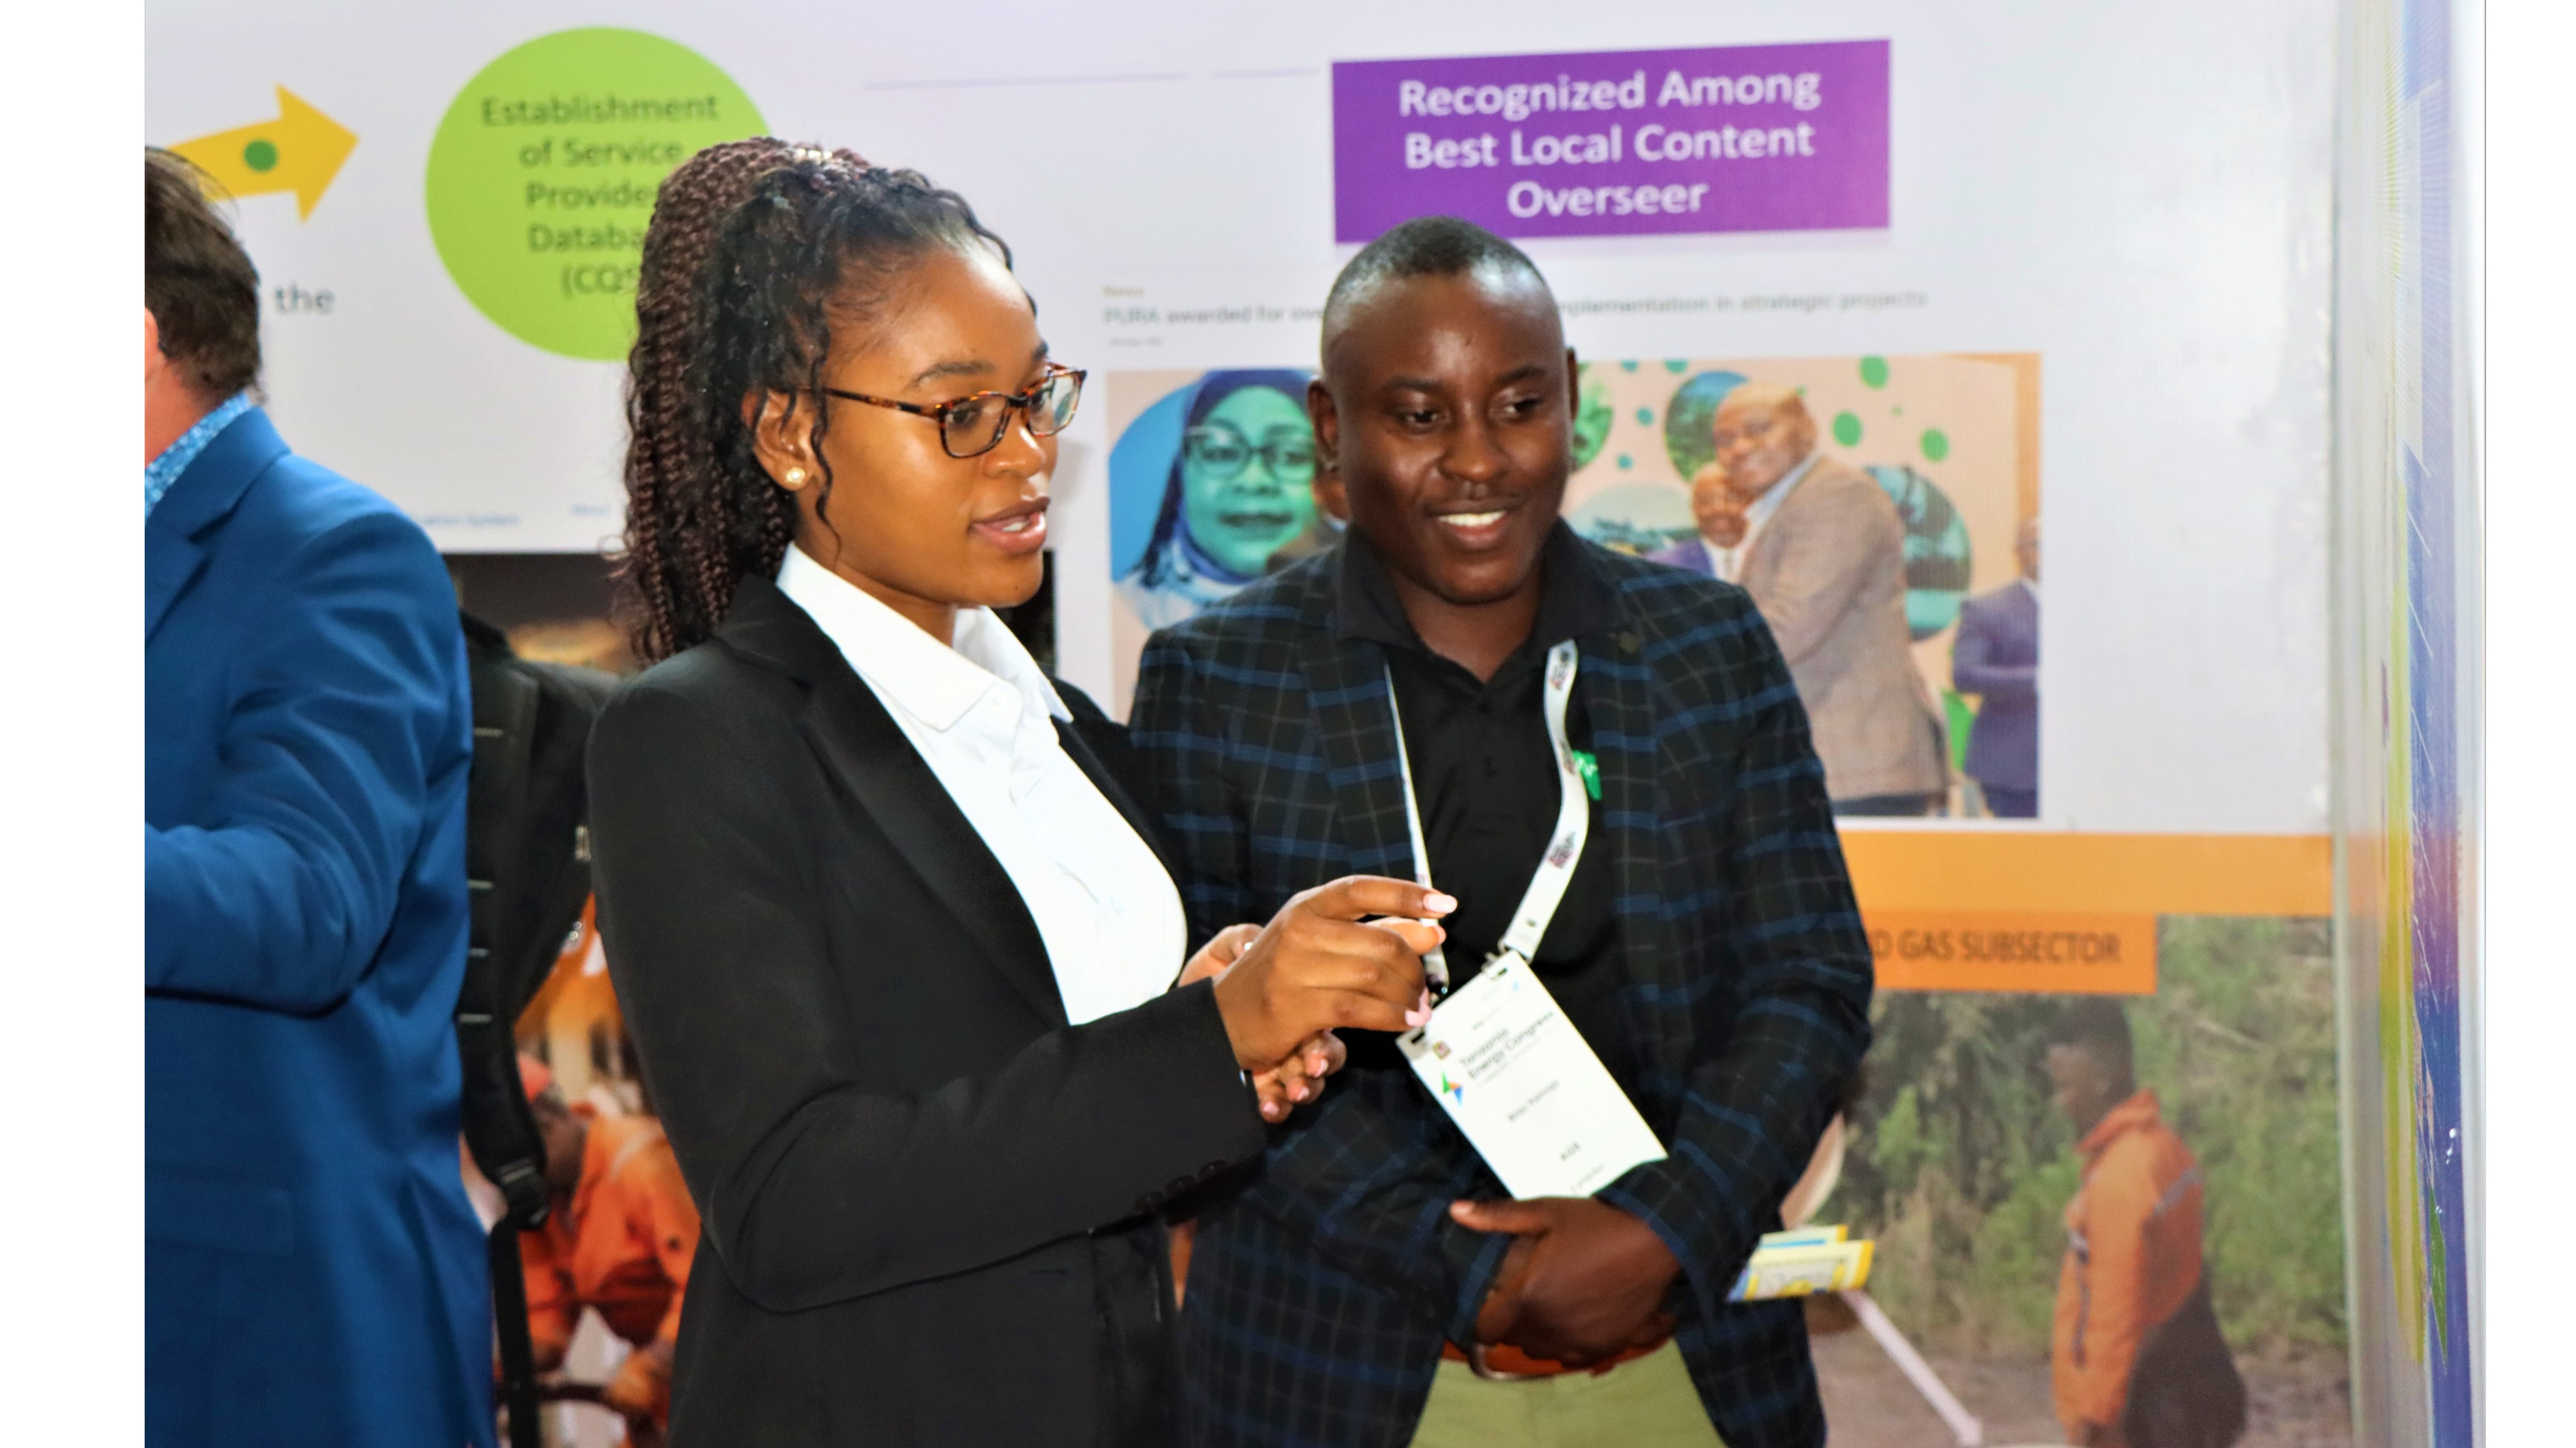 Ms. Robinnancy Mtitu, a Petroleum Engineer from PURA explaining about petroleum upstream operations in the country to one of the congress attendees who visited PURA’s booth at the 4th Oil and Gas Congress held in Dar es Salaam from 03rd to 4th August, 2022